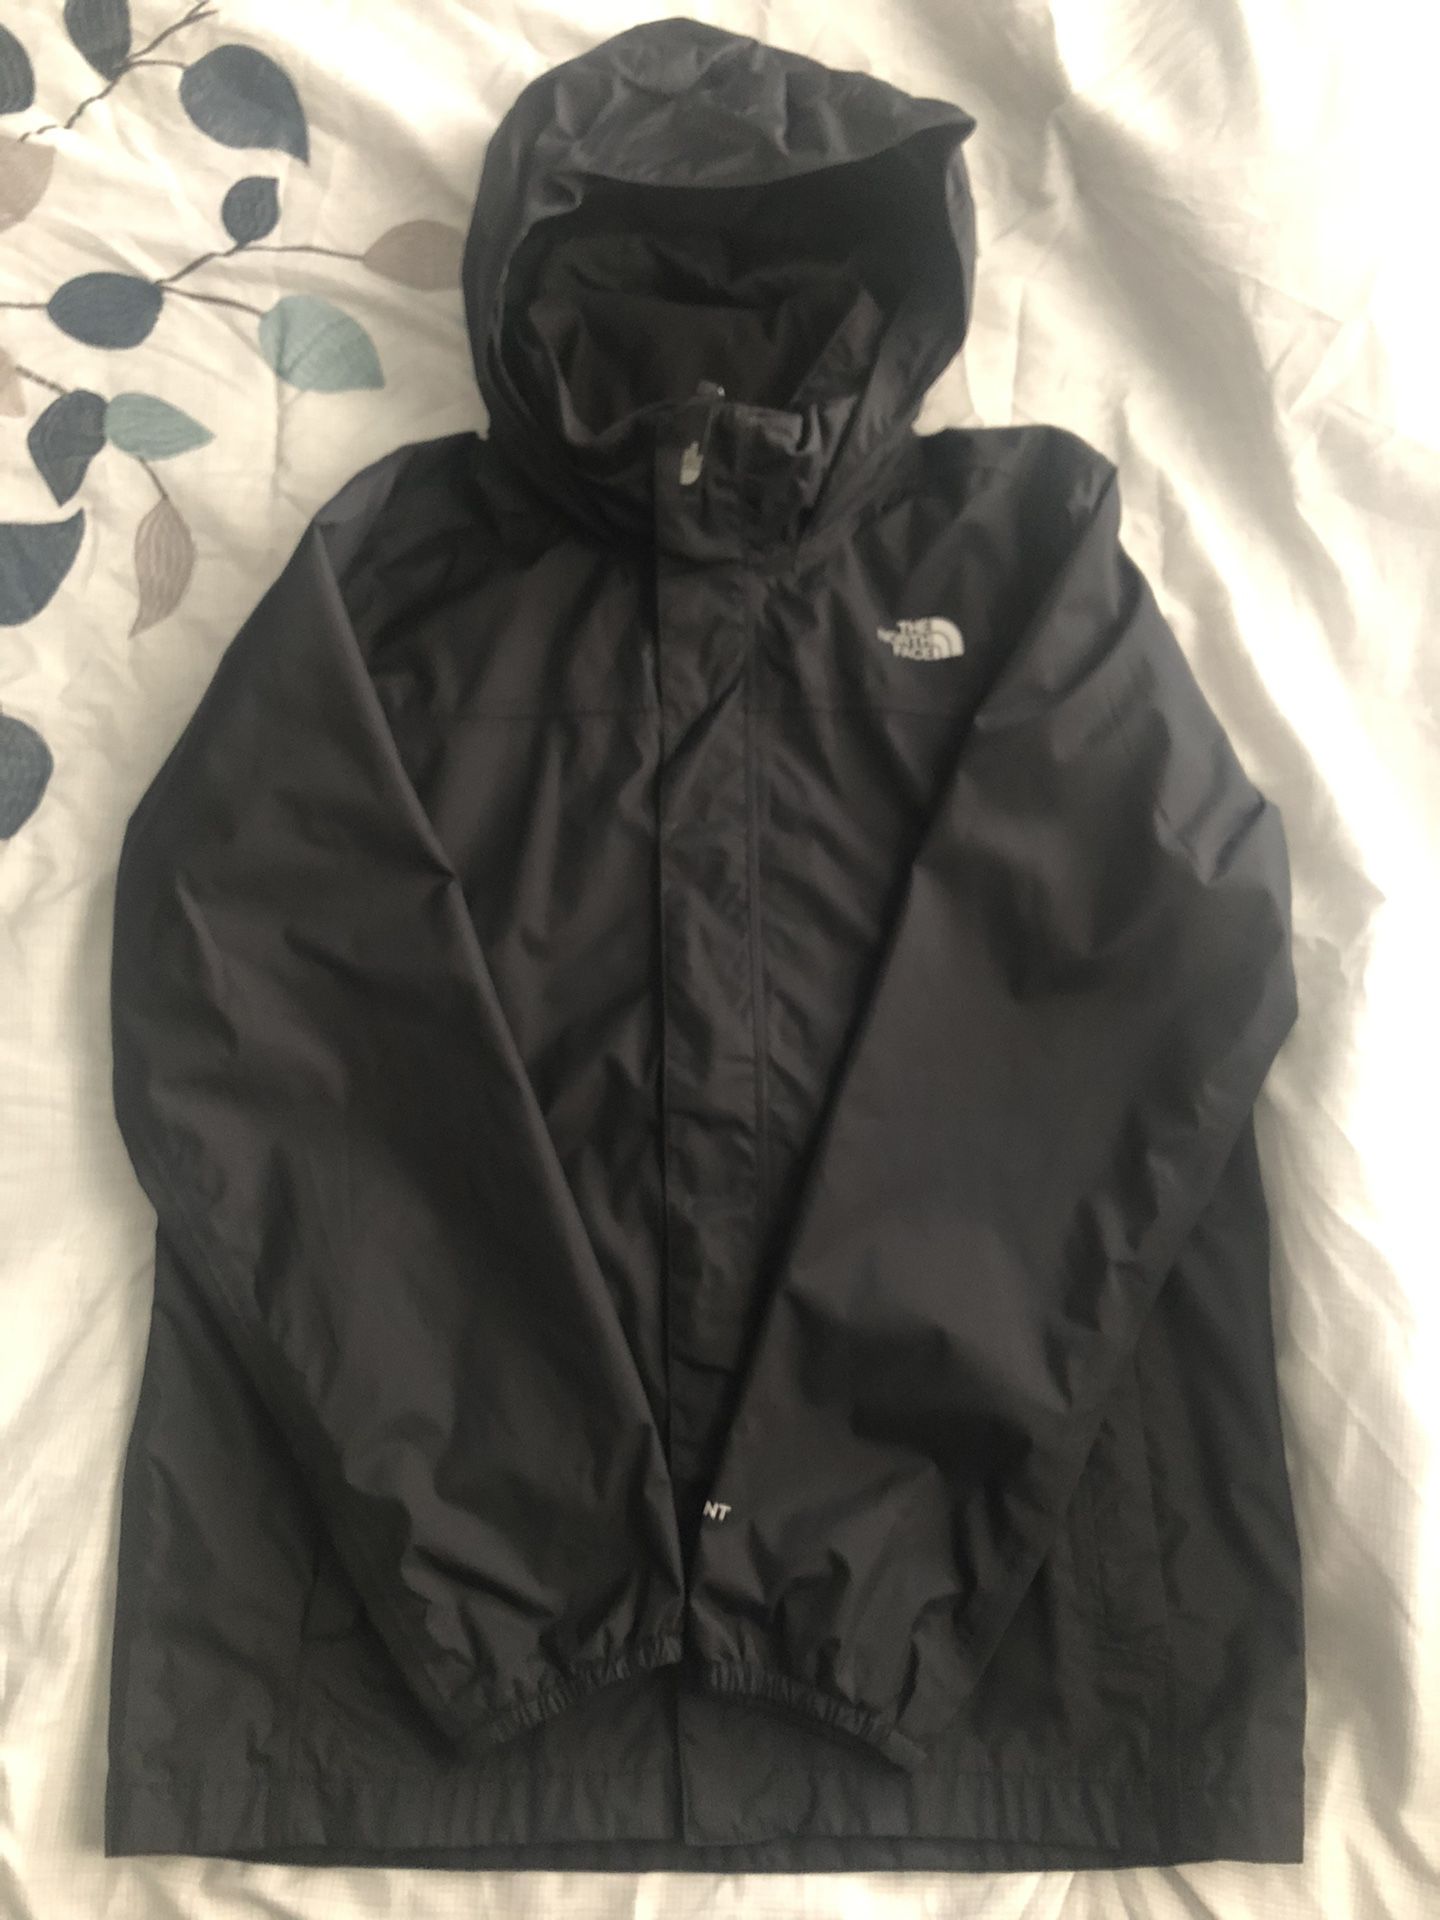 THE NORTH FACE Boys Hooded Black Waterproof Jacket Size 14/16 GREAT CONDITION